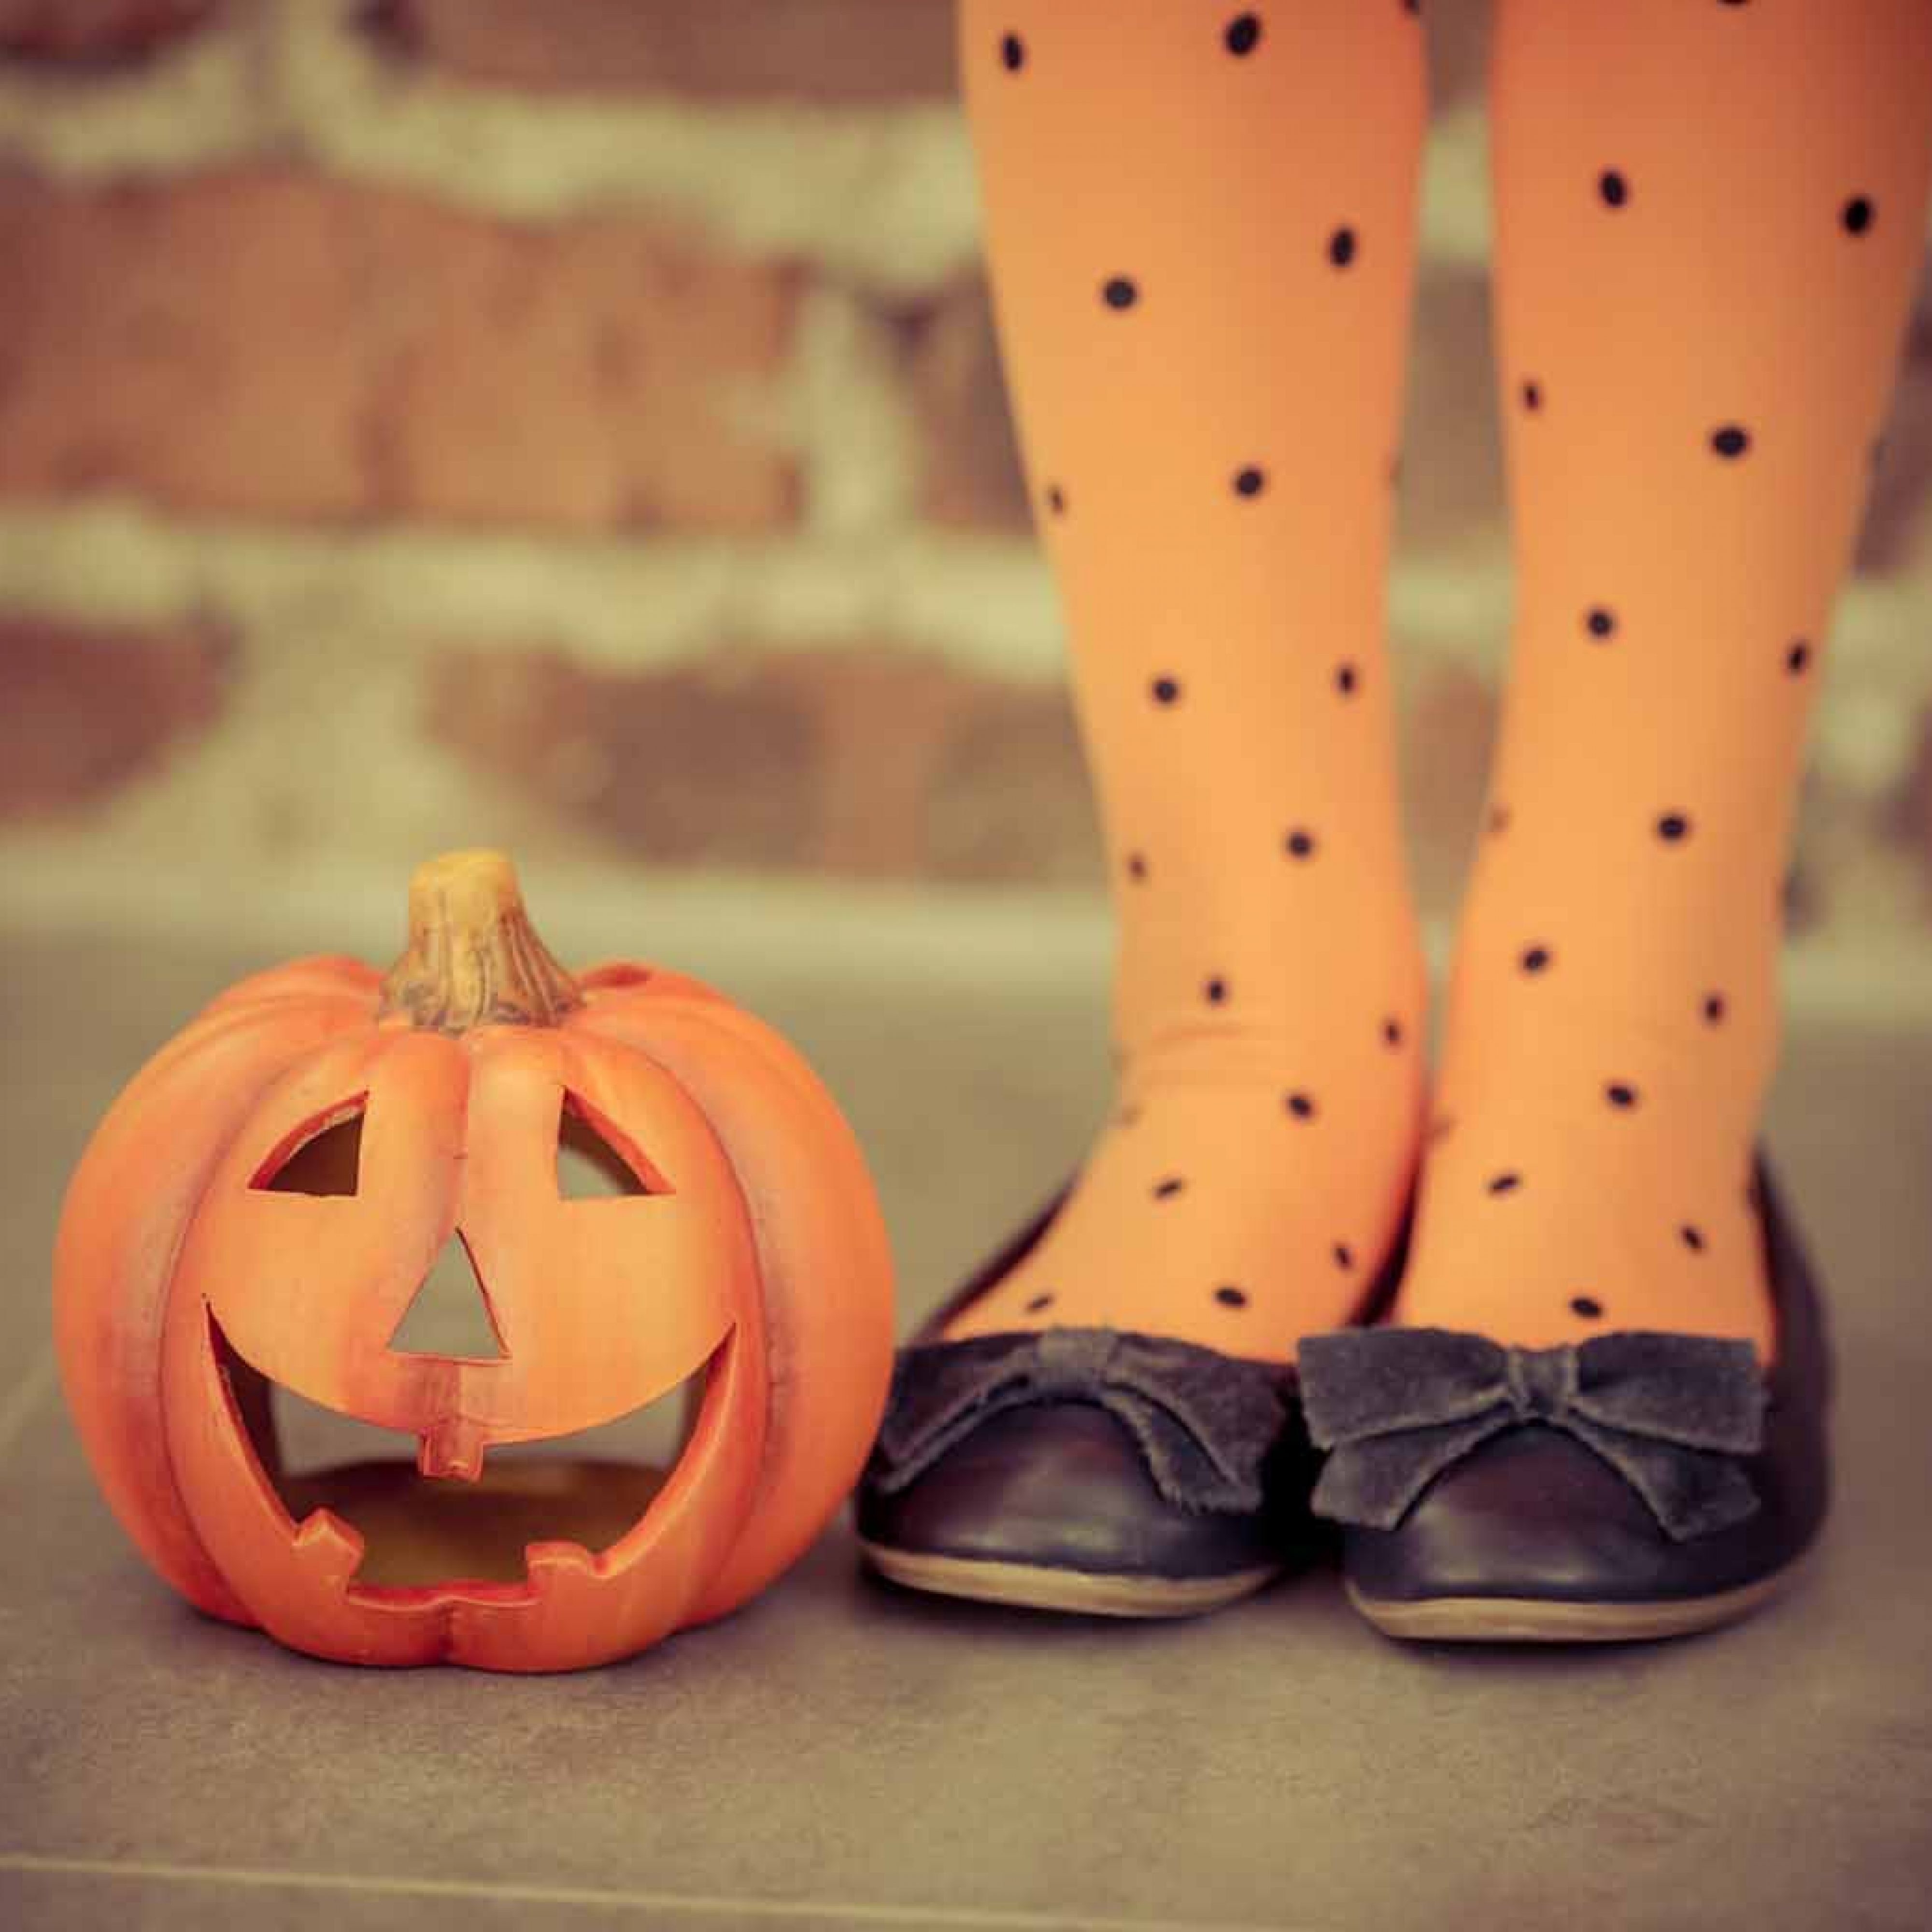 The Fun in Simple Halloween Traditions